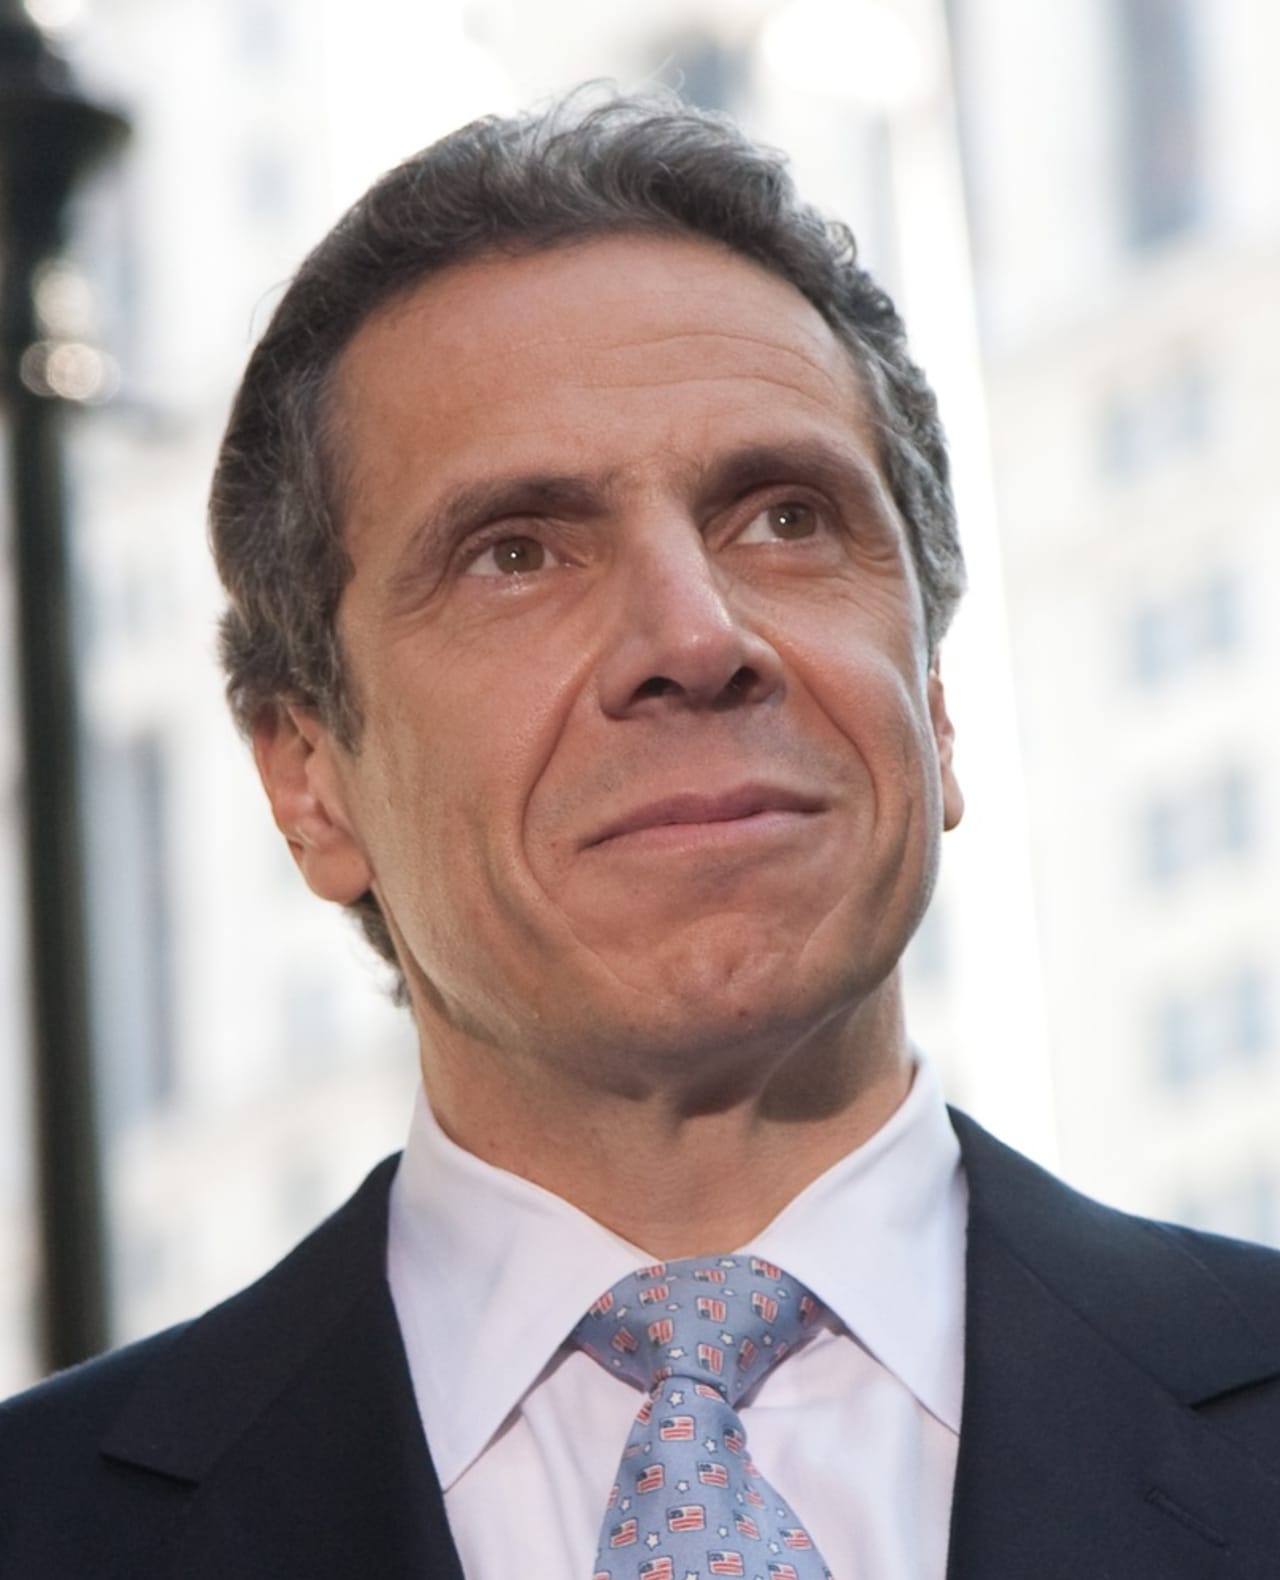 New York Gov. Andrew Cuomo is going after the federal government over their handling of the COVID-19 crisis.